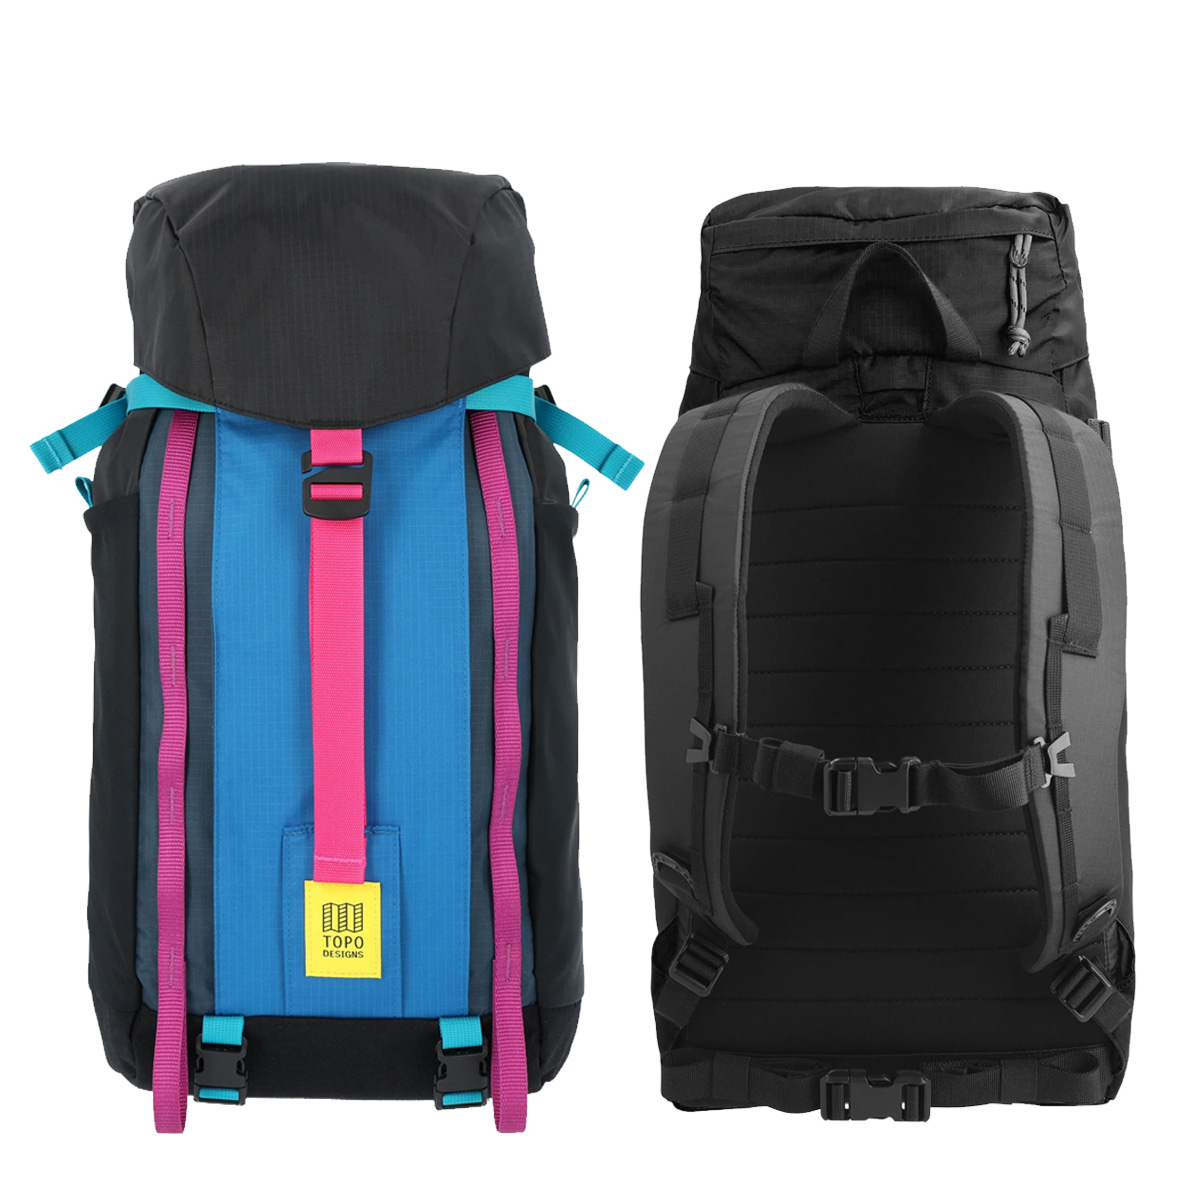 Topo Designs Mountain Pack 16L Black/Blue, front and back